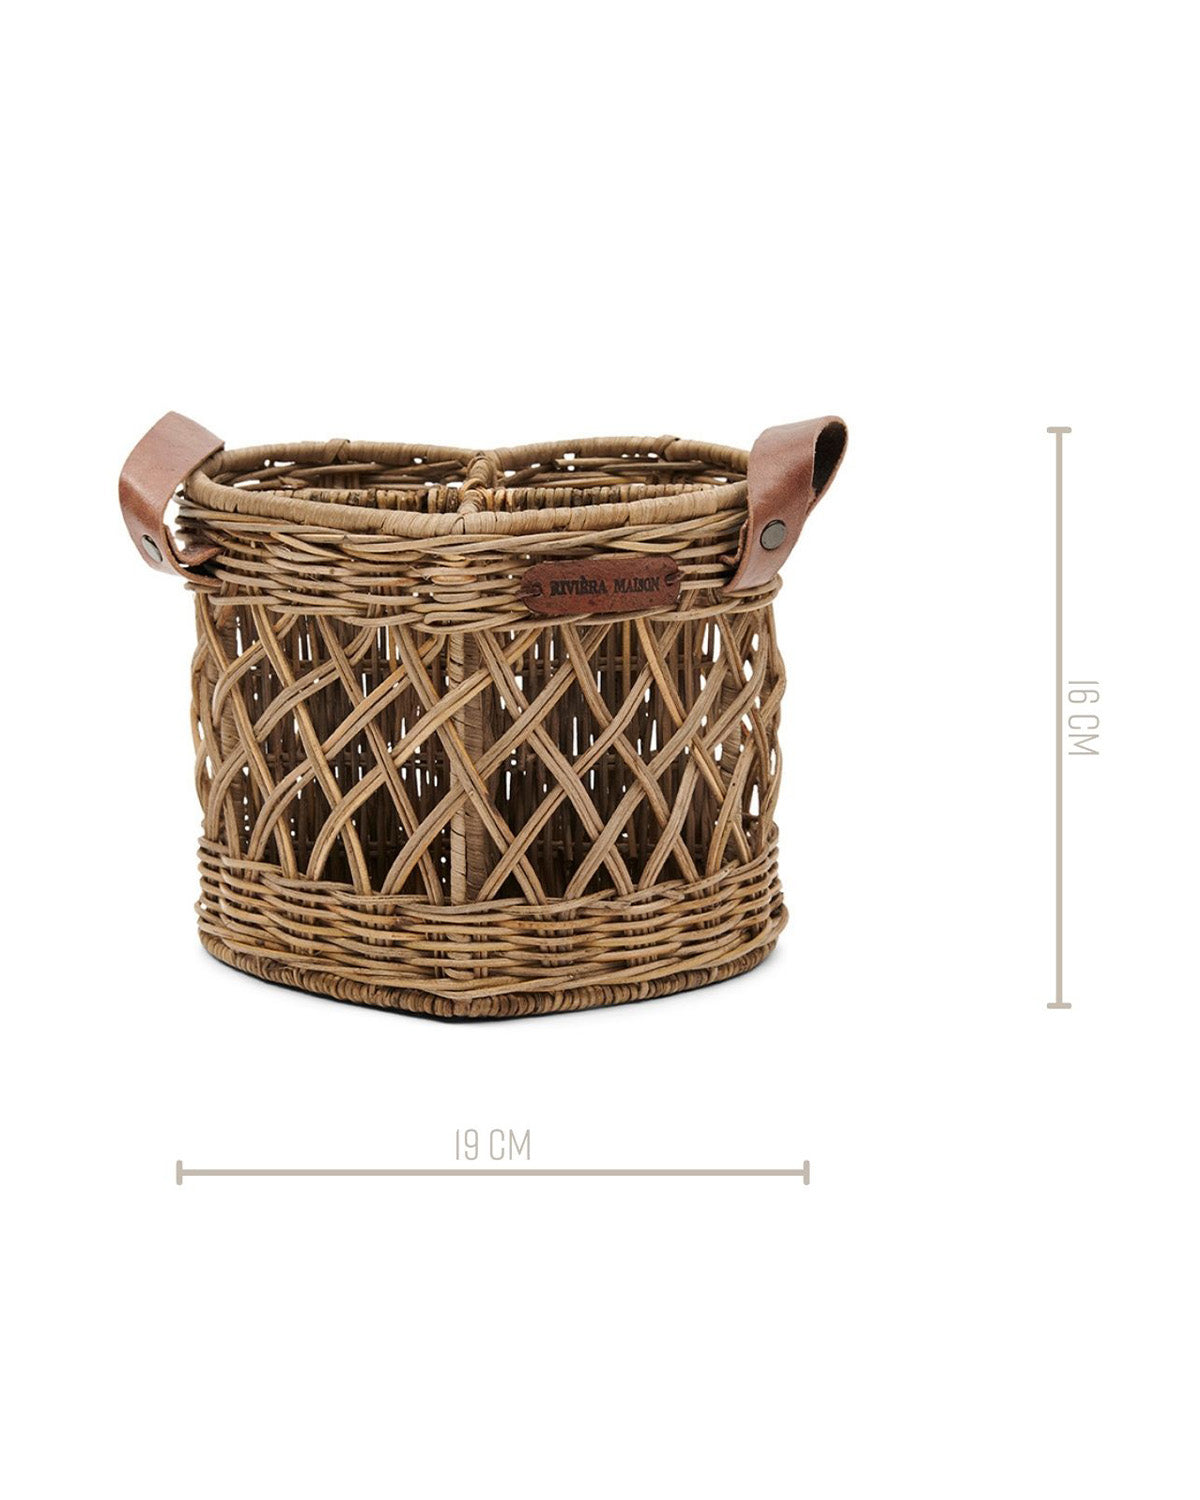 UTENSILS HOLDER HEART shape made from openwork rattan with leather handles by Riviera Maison